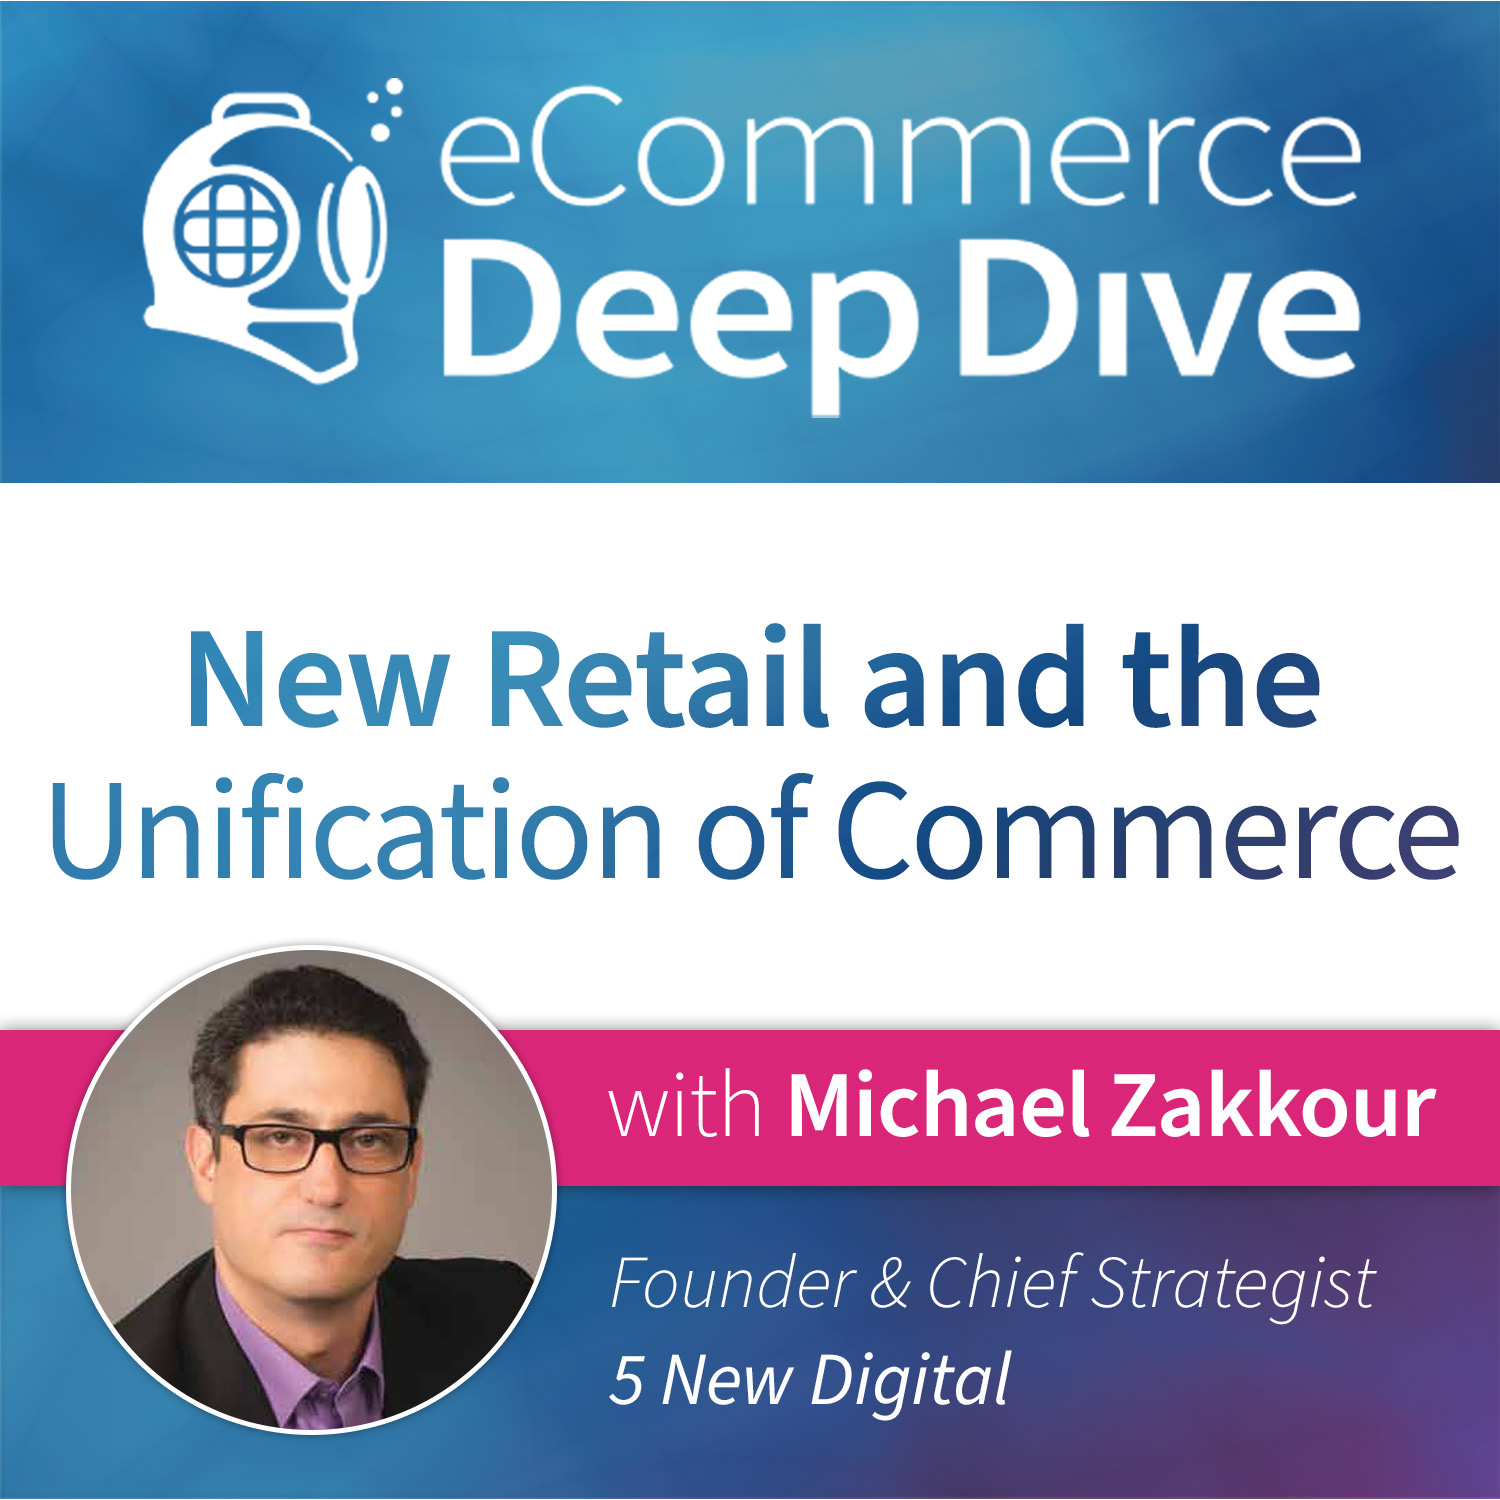 Michael Zakkour: New Retail and the Unification of Commerce